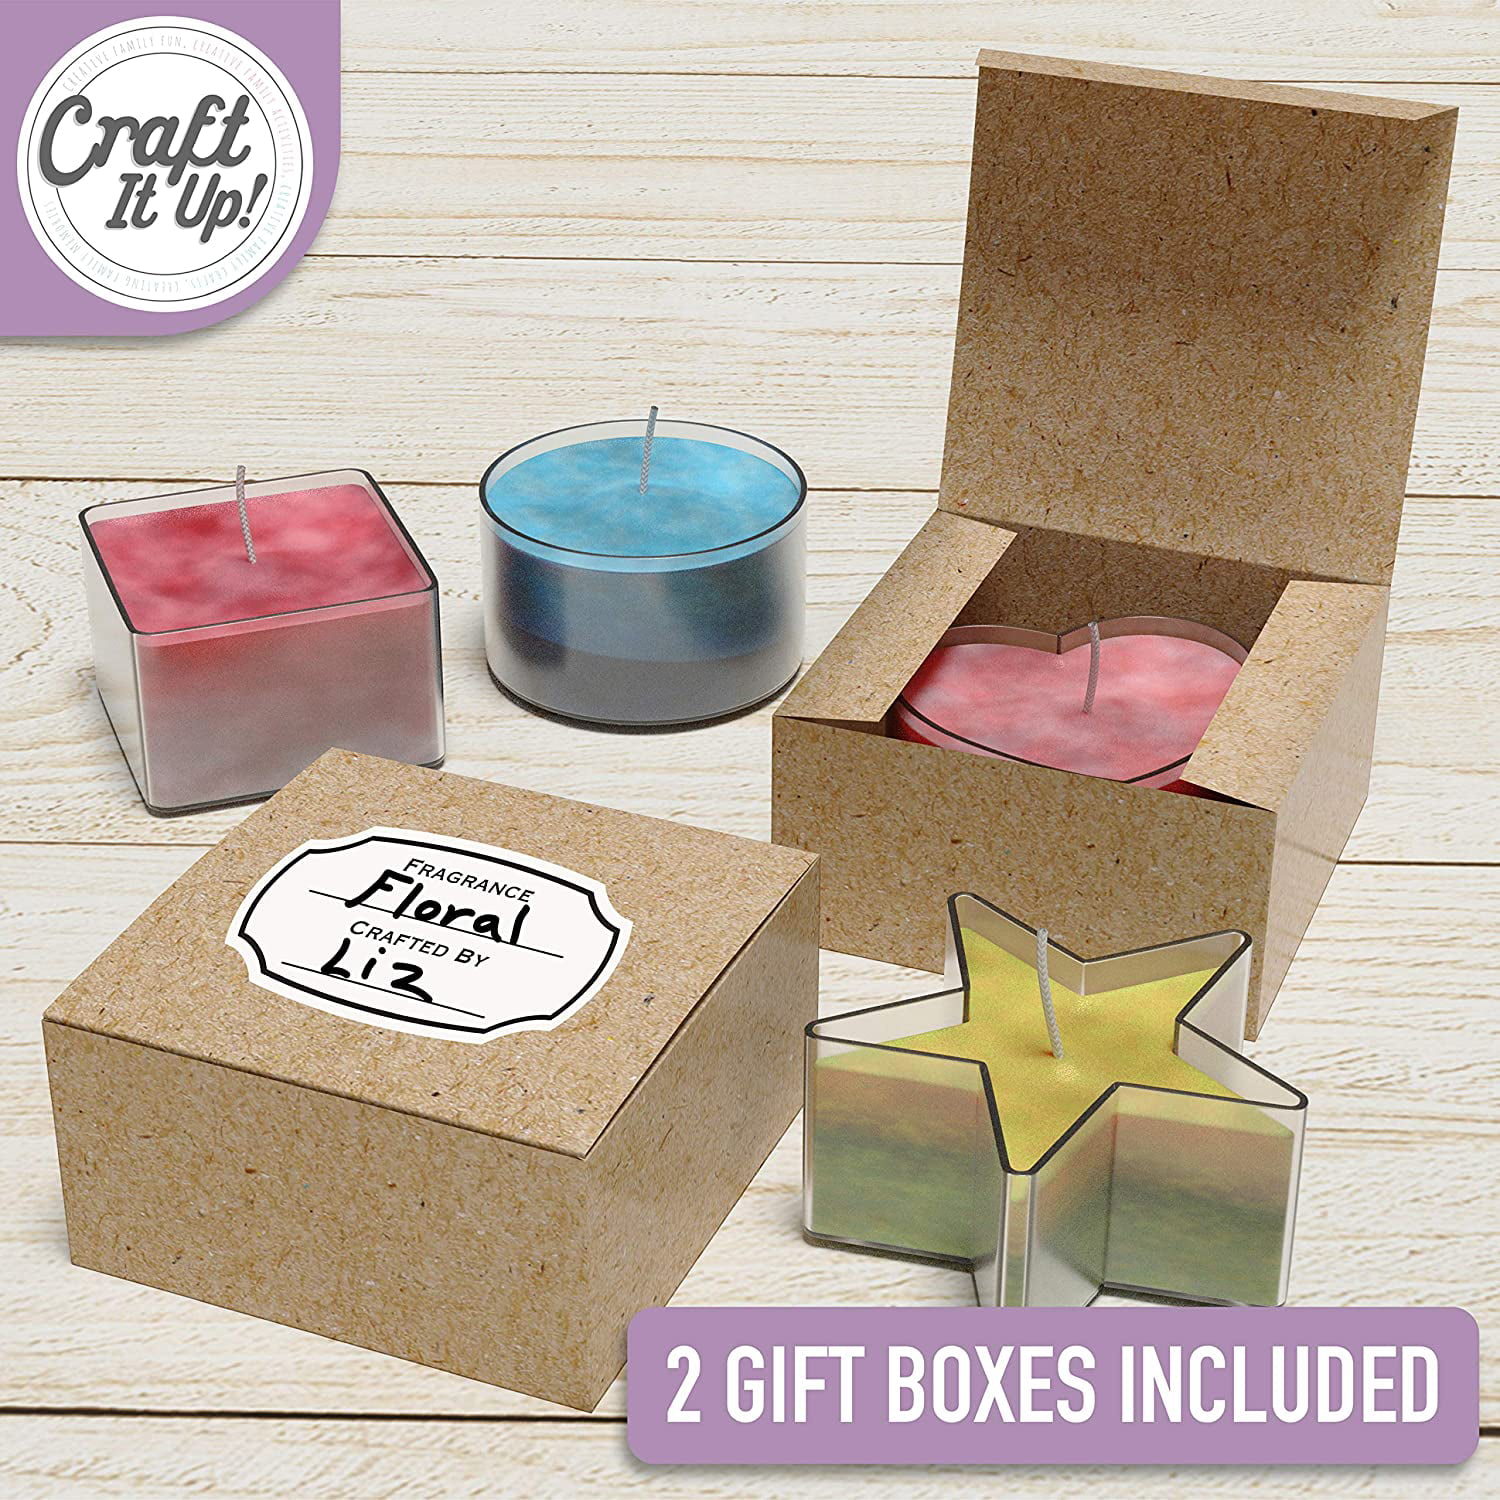 Candle Making Kit: The Ultimate DIY Experience – Selfmade Candle